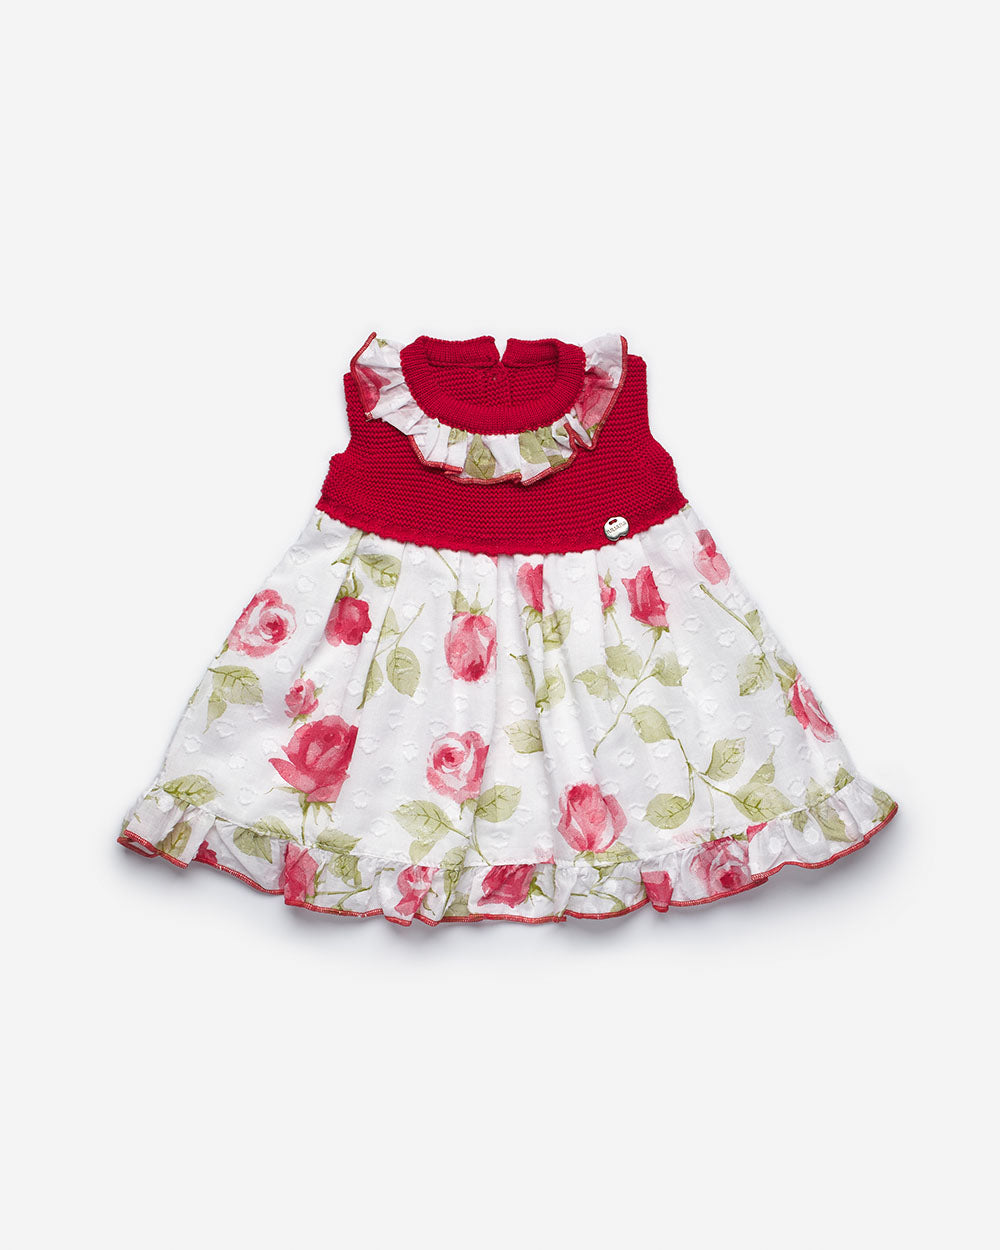 Juliana Red Knitted Roses Dress